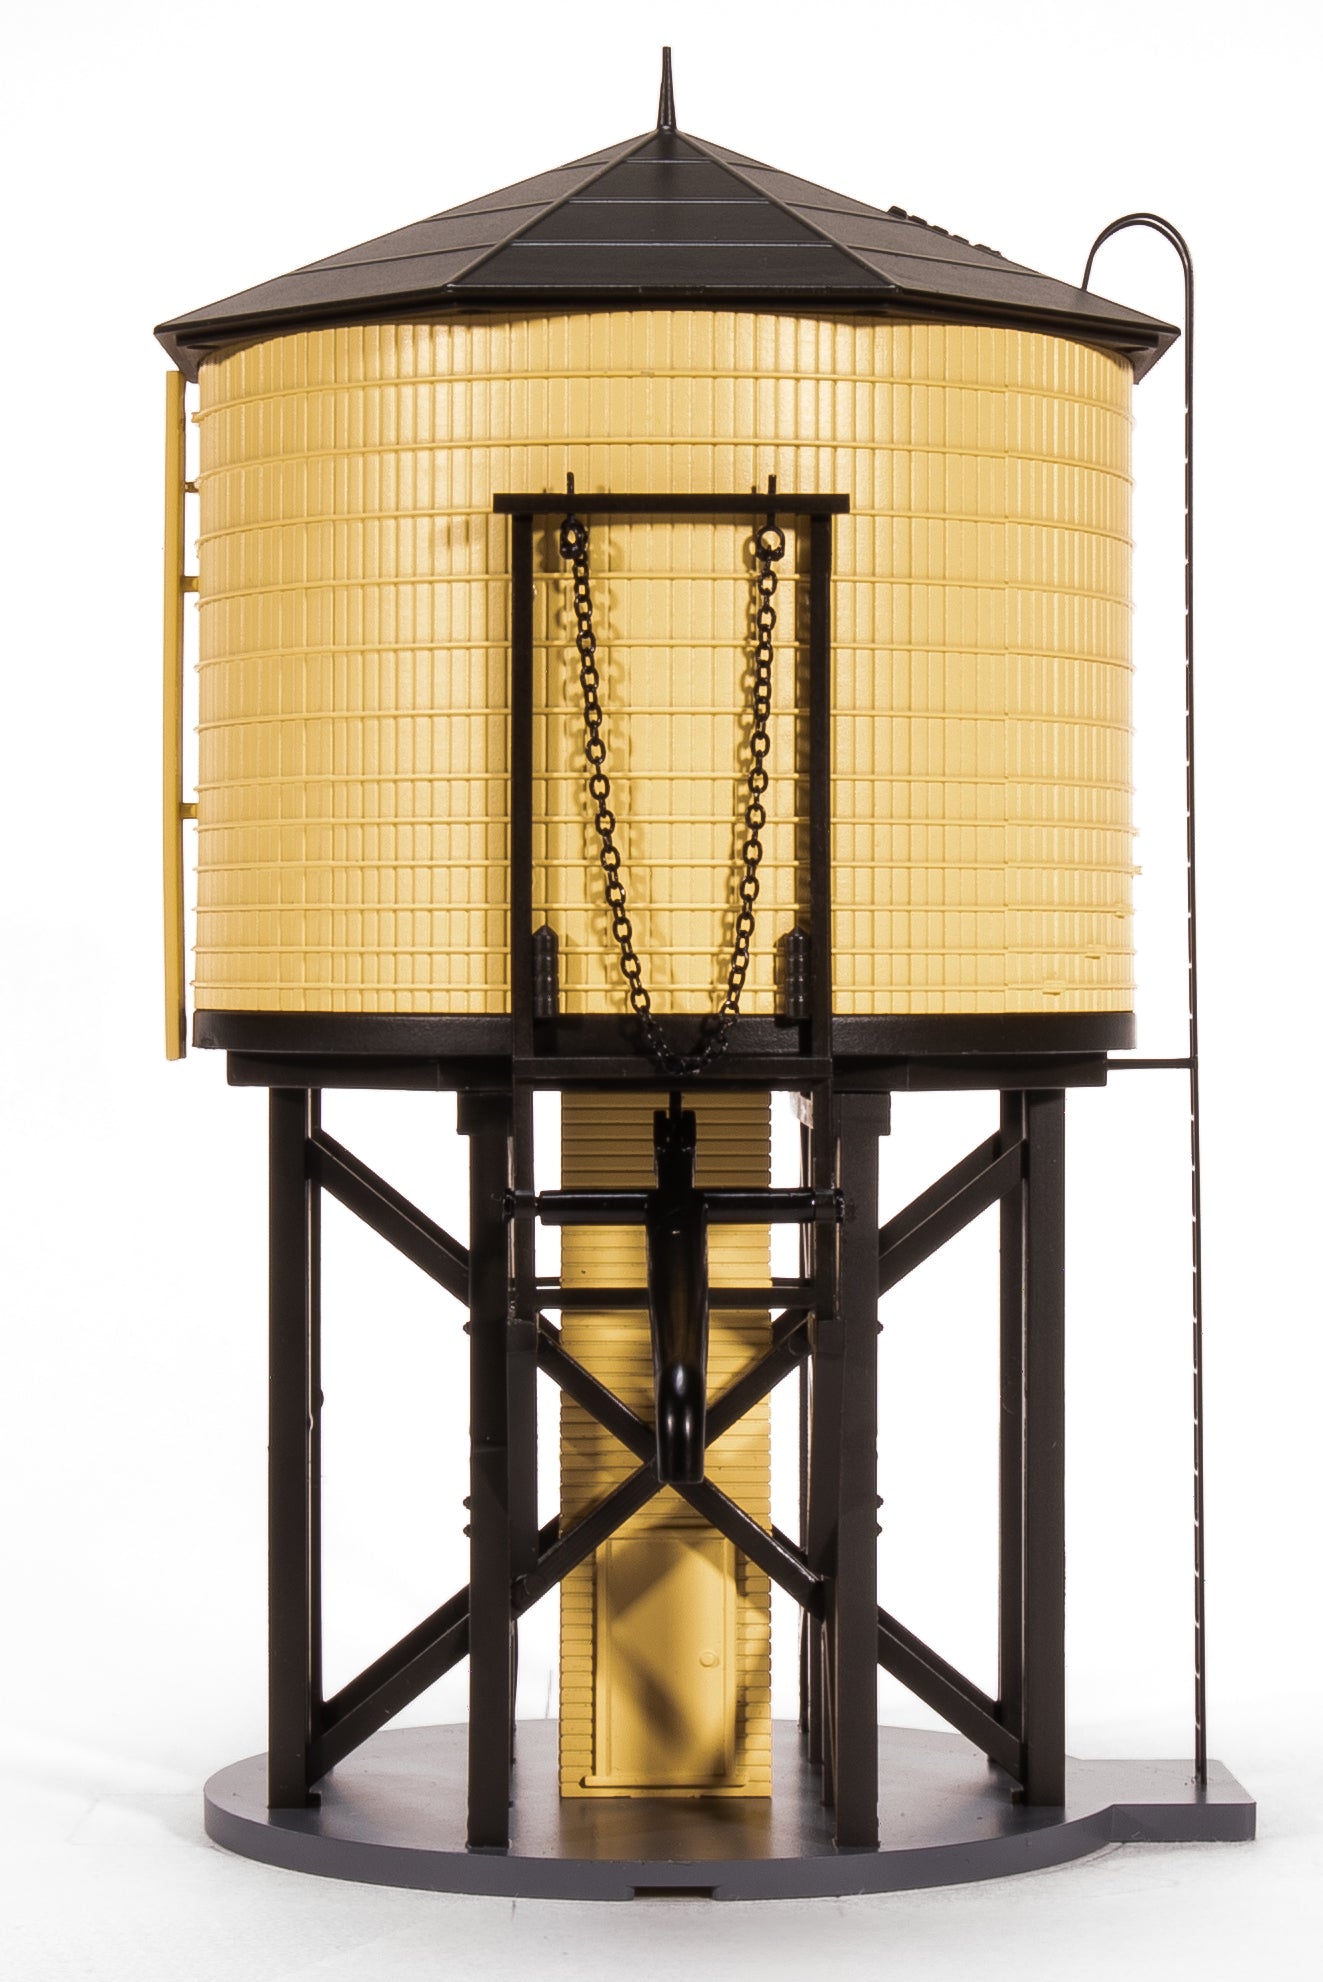 7913 Operating Water Tower w/ Sound, Non-weathered Yellow, Unlettered, HO Default Title